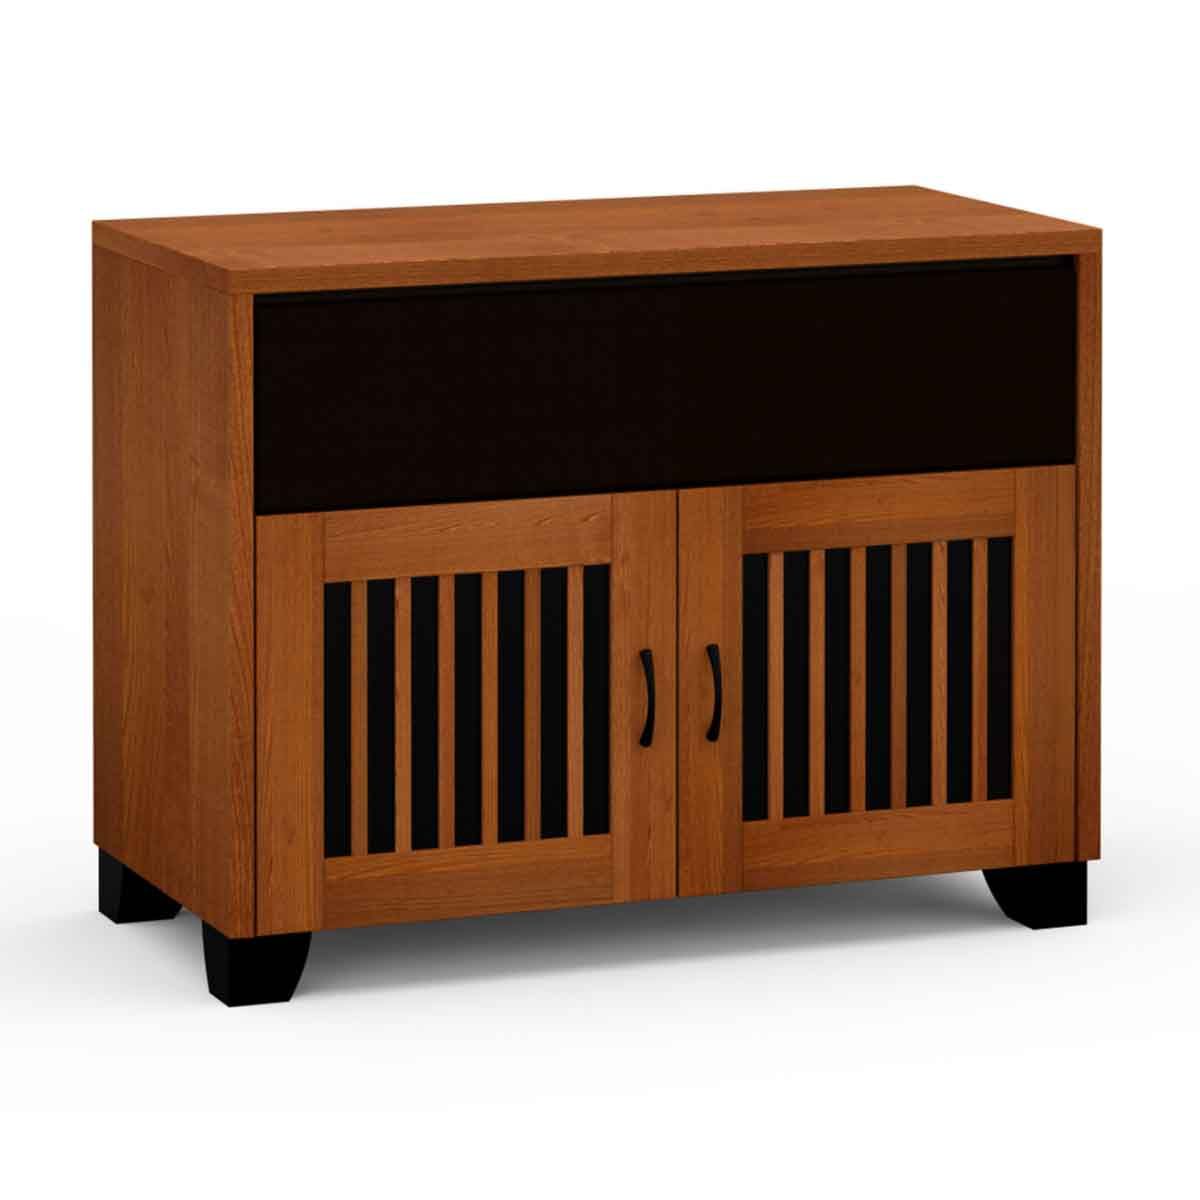 Salamander Designs Sonoma 329 Twin-Width AV Cabinet With Center Speaker Opening- American Cherry- front view